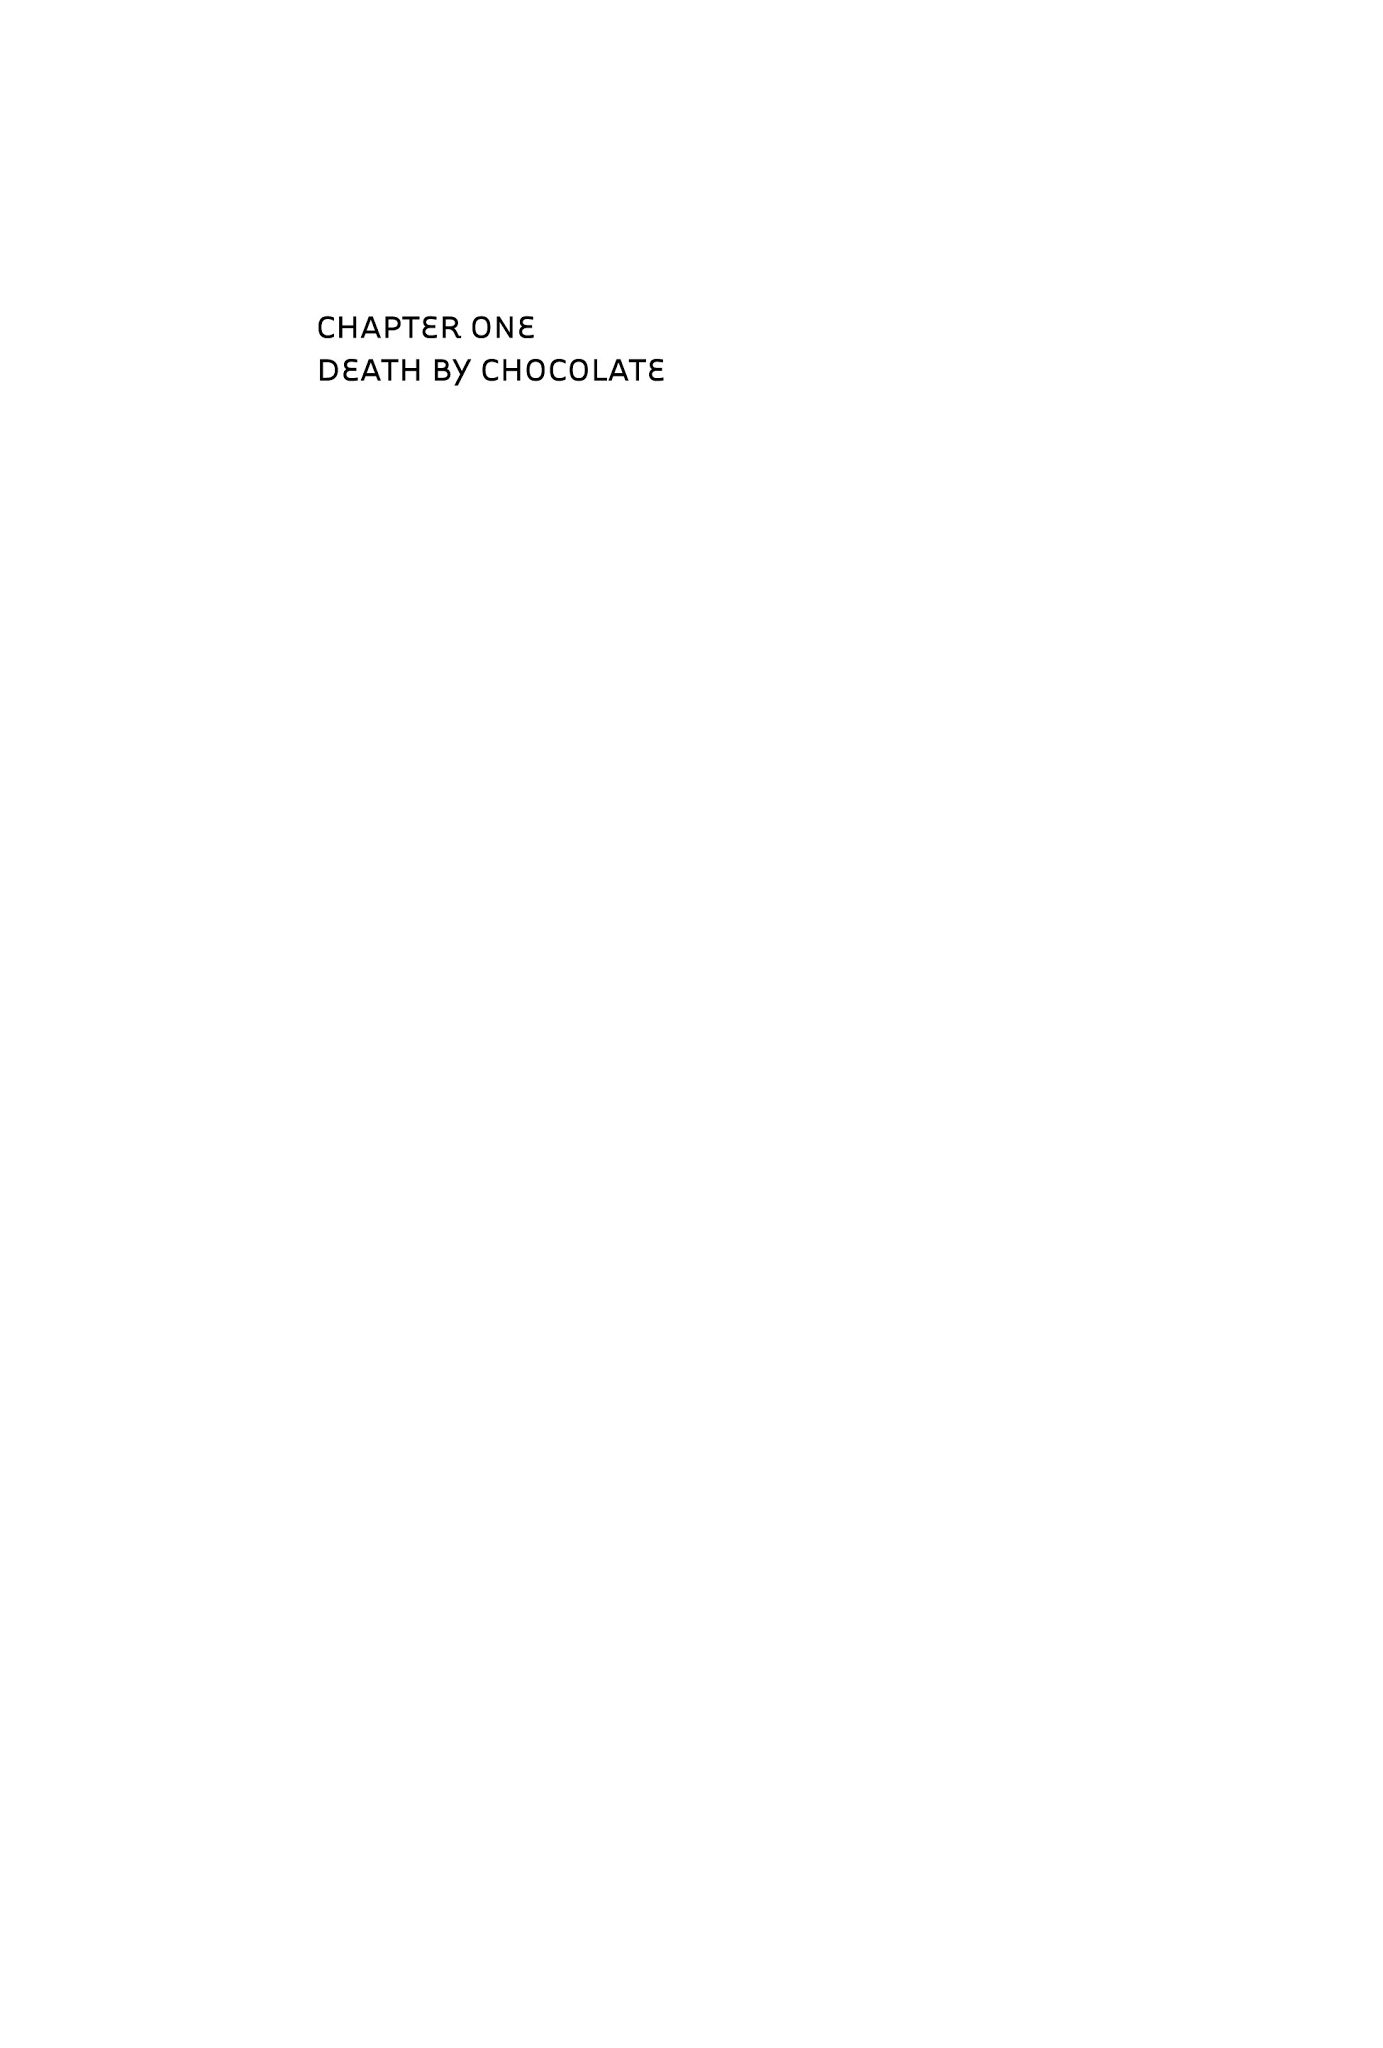 Read online Death by Chocolate: Redux comic -  Issue # TPB - 9